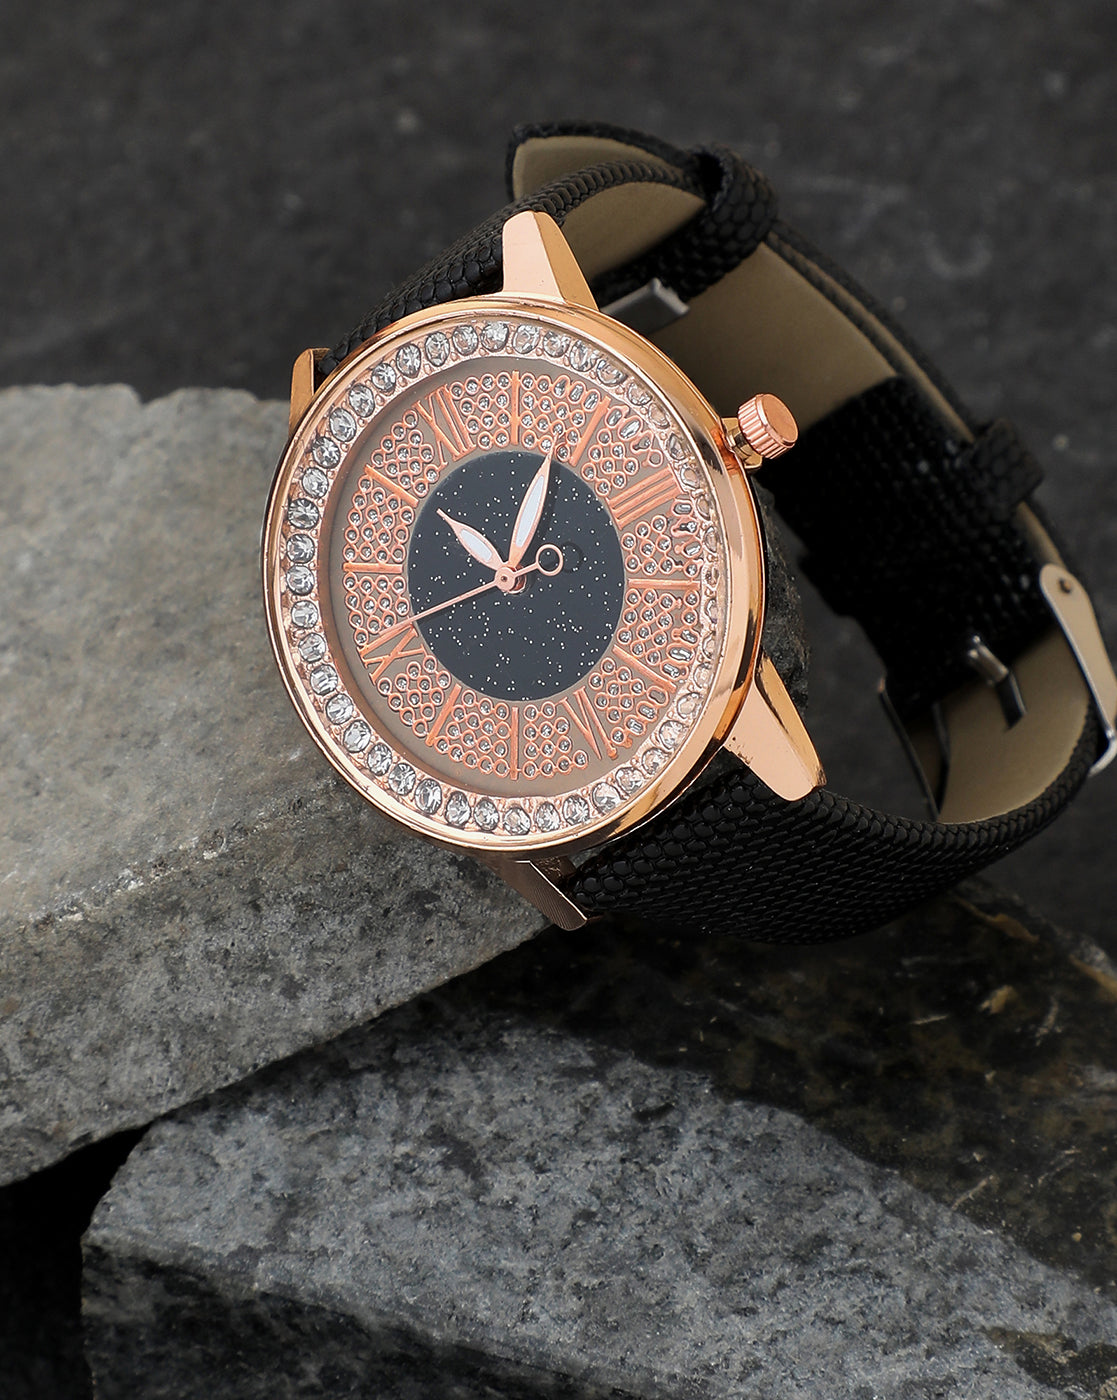 Rose Gold & Black Crystal Stone Analog Round Dial With Black Textured Leather Strap